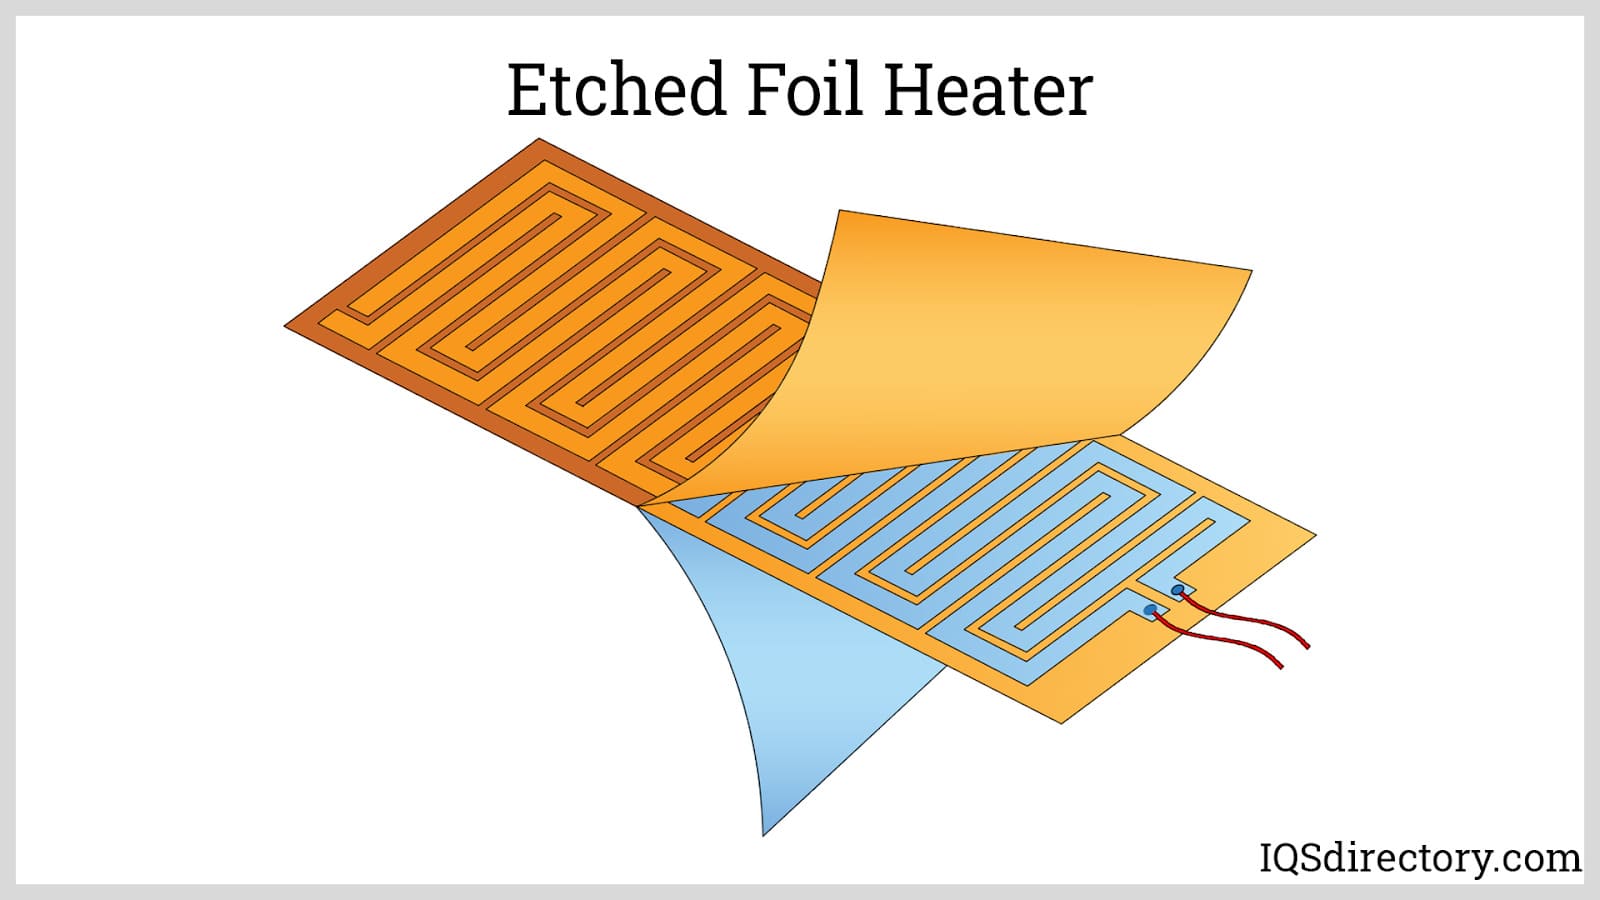 Etched Foil Heater